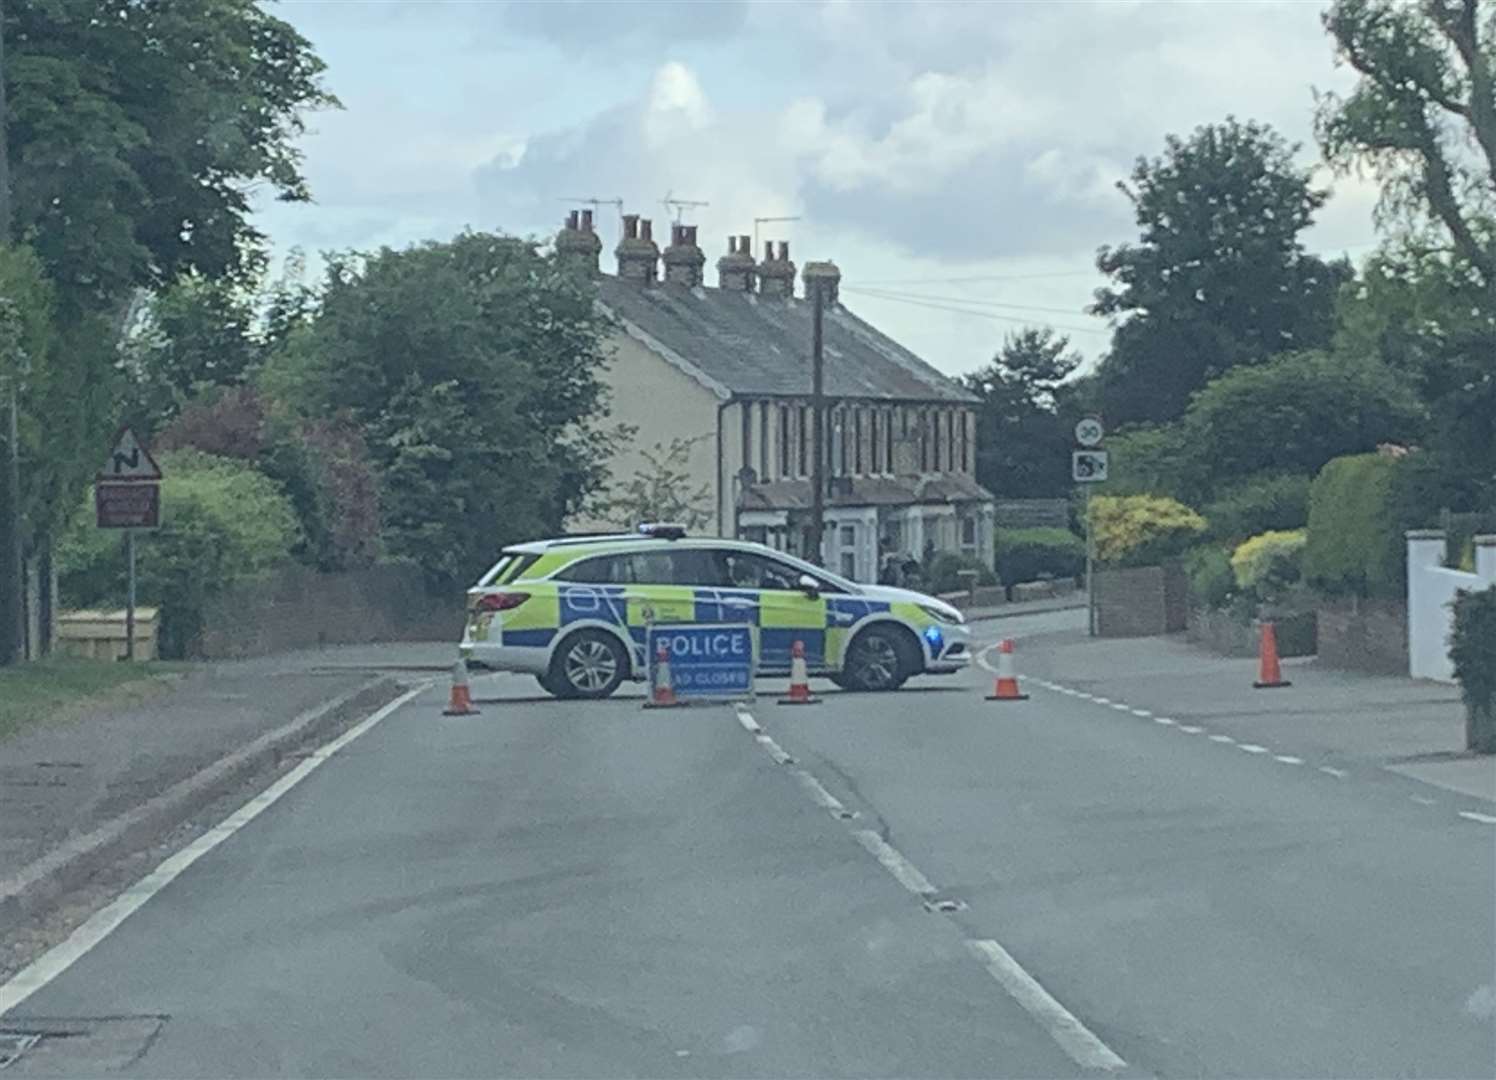 The A227 Wrotham Road has been shut near Meopham Green (11282528)